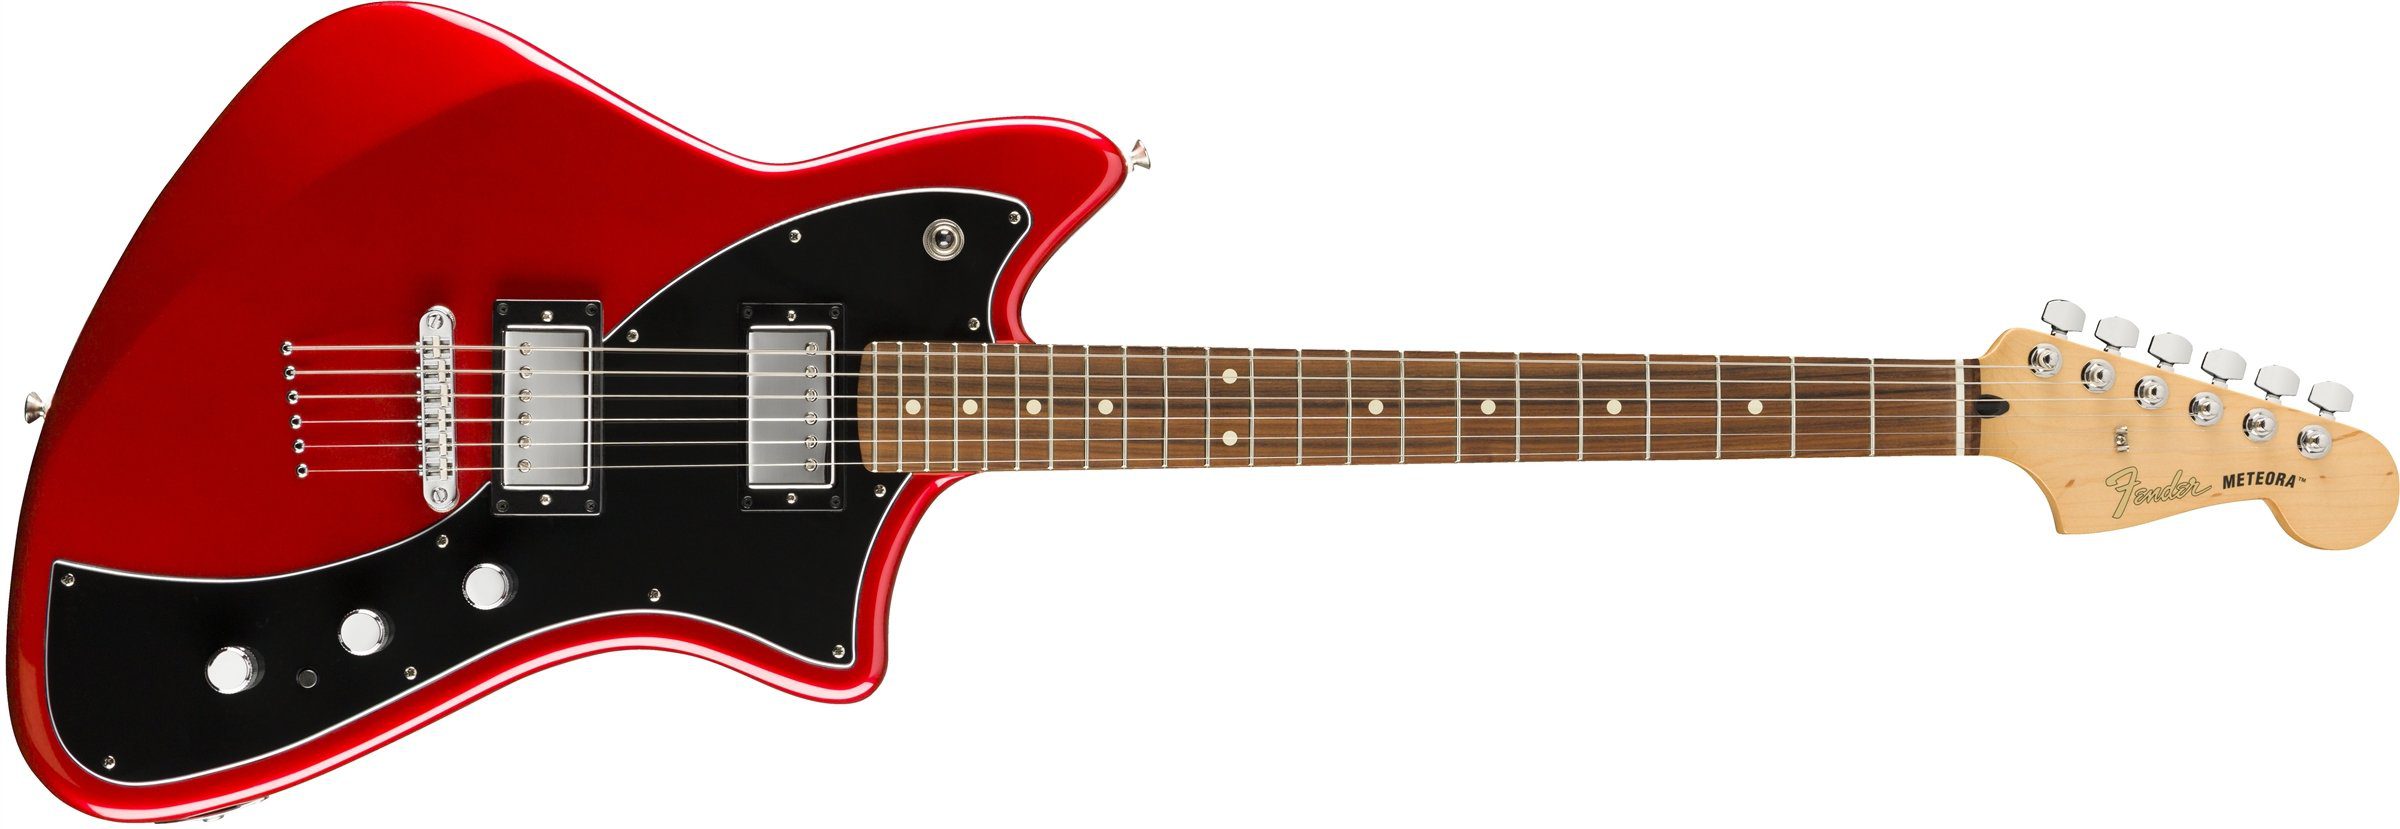 Fender-Alternate-Reality-Meteora-HH-in-Candy-Apple-Red